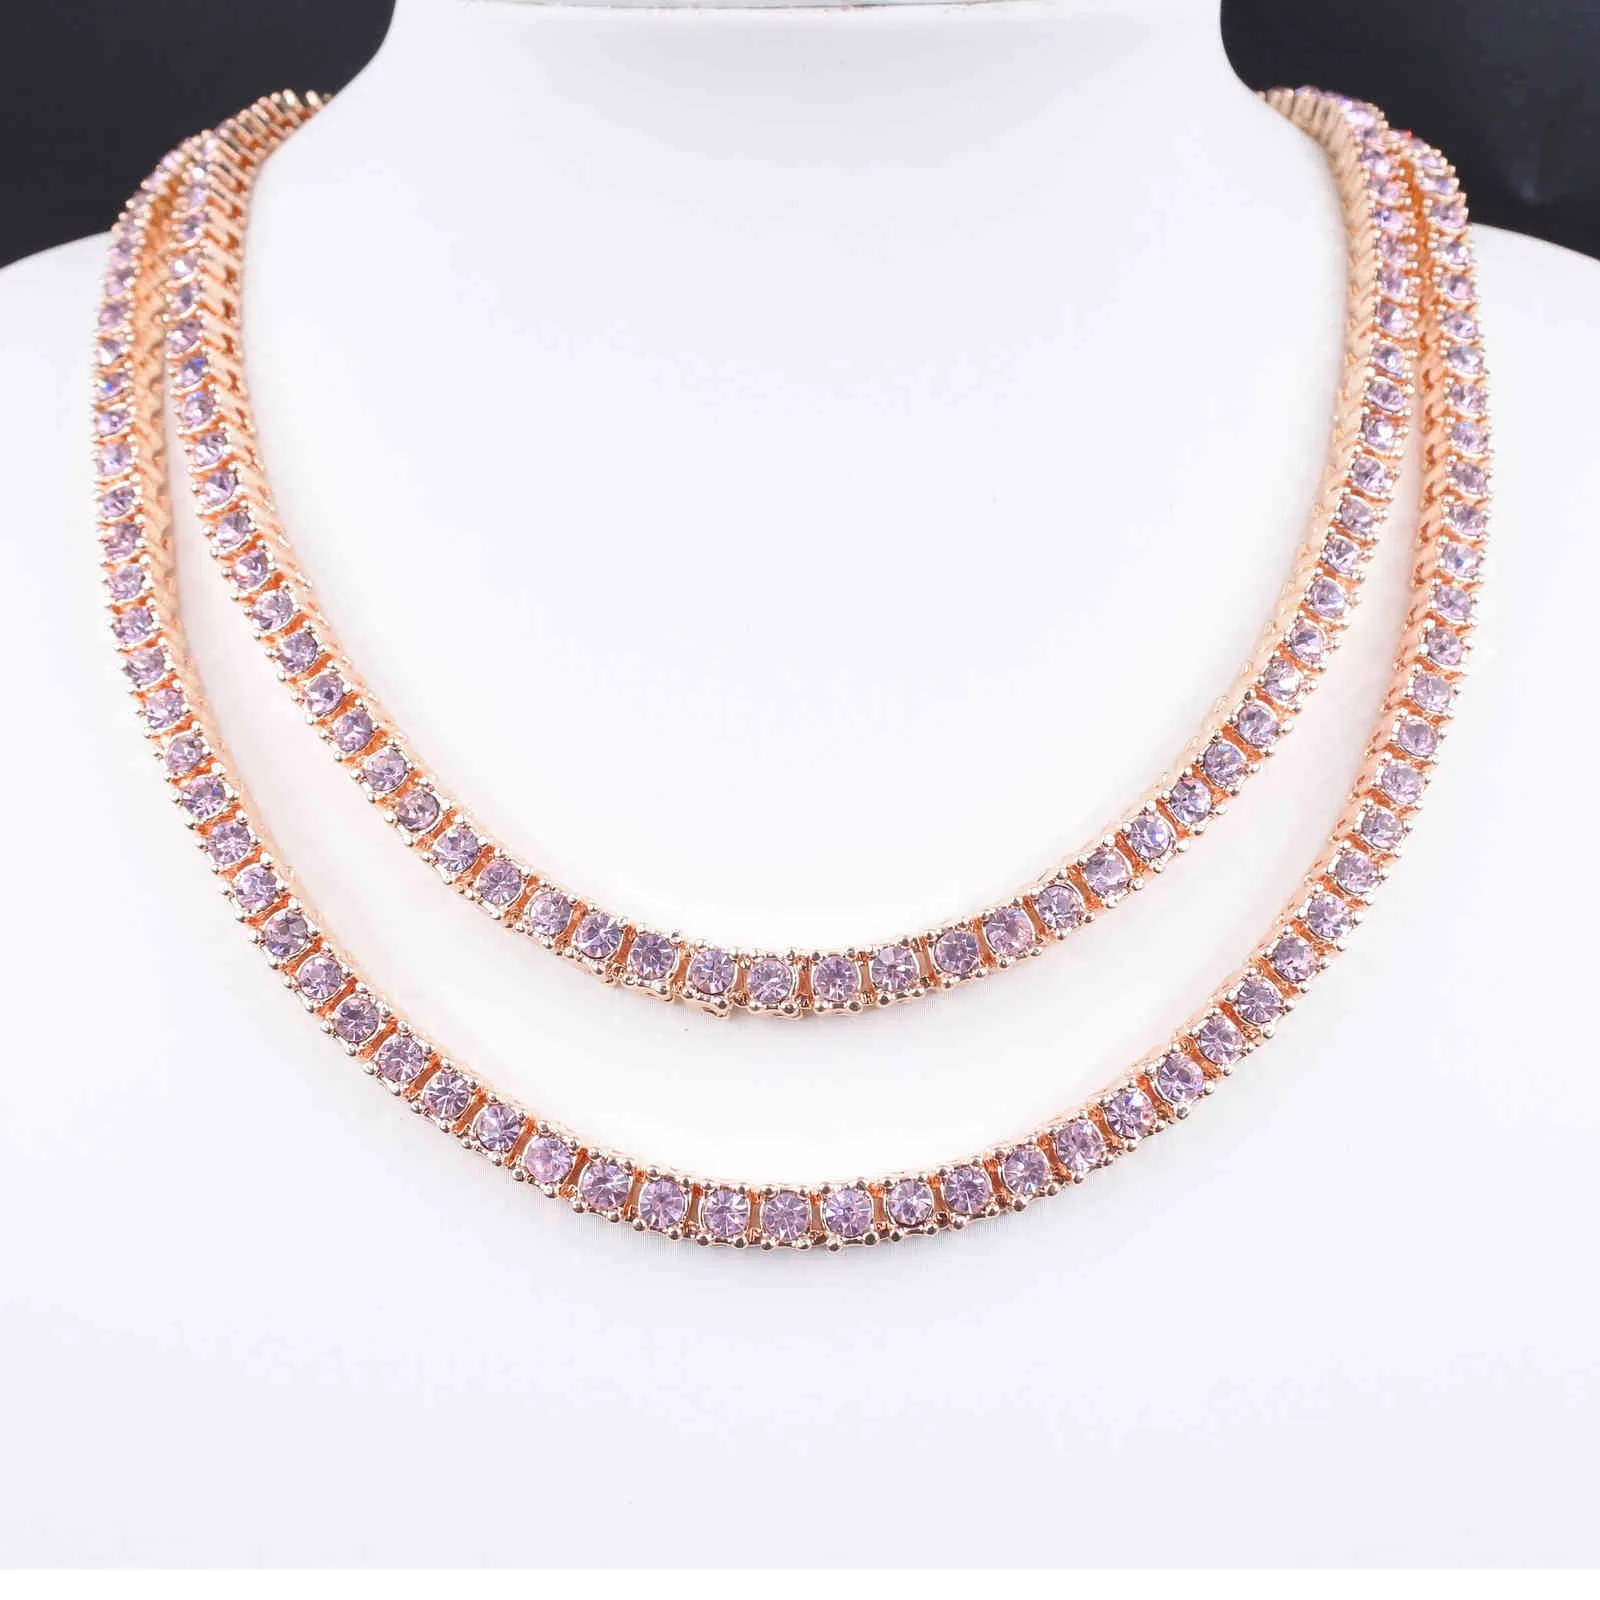 Rose gold pink crystal 1 row tennis chain hip hop women's necklace men's punk rapper singer's iced out bling cz fashion jewelry